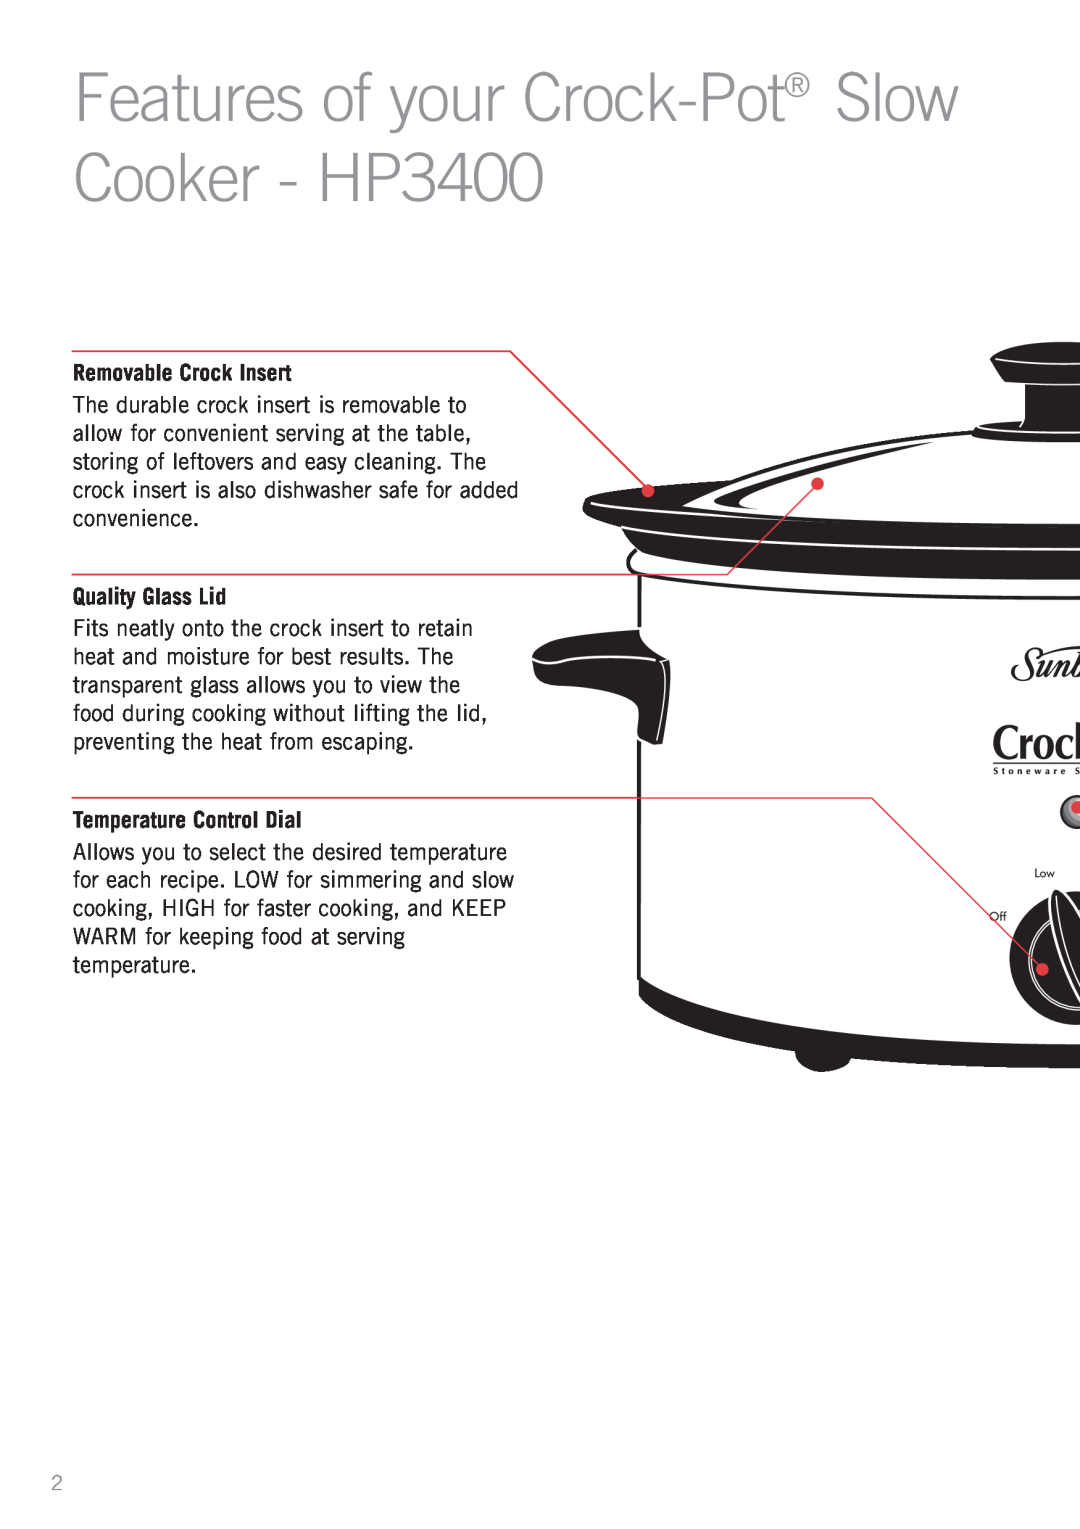 Sunbeam HP2200 manual Features of your Crock-Pot Slow Cooker - HP3400, Removable Crock Insert, Quality Glass Lid 